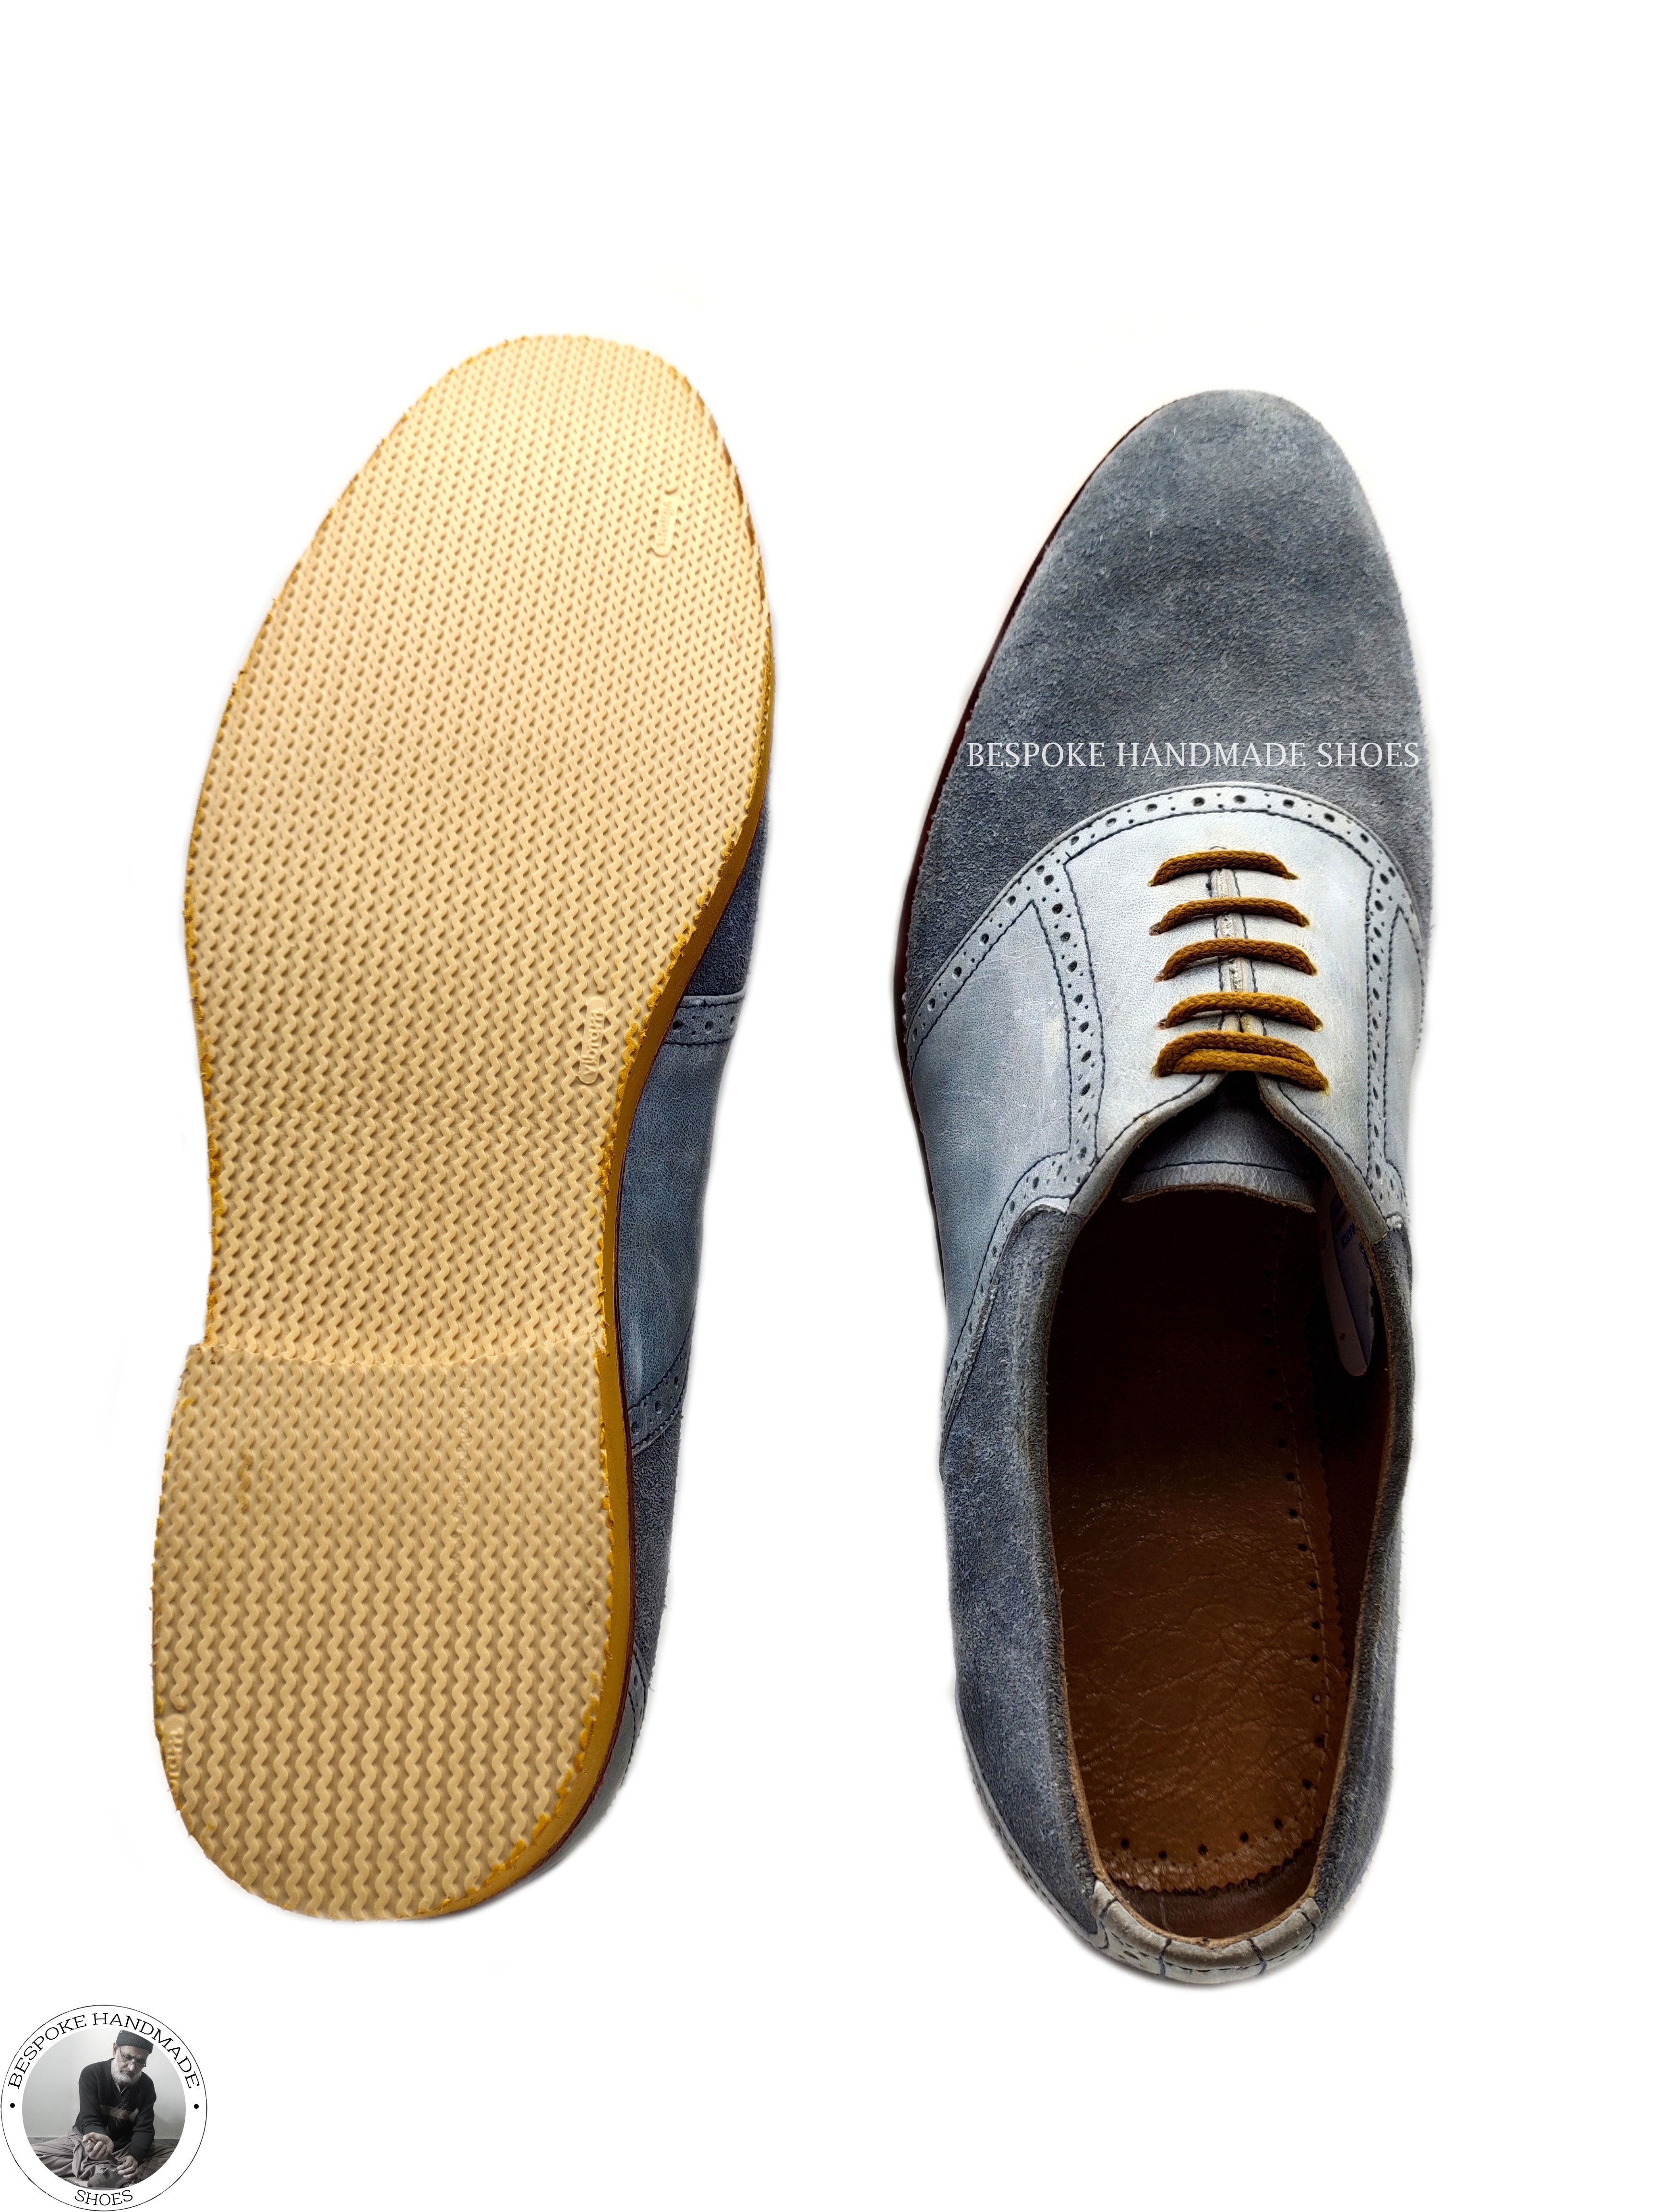 Custom Made Bespoke Men's Blue Leather and Suede Oxford Lace Up Vibram Sole Dress Shoes